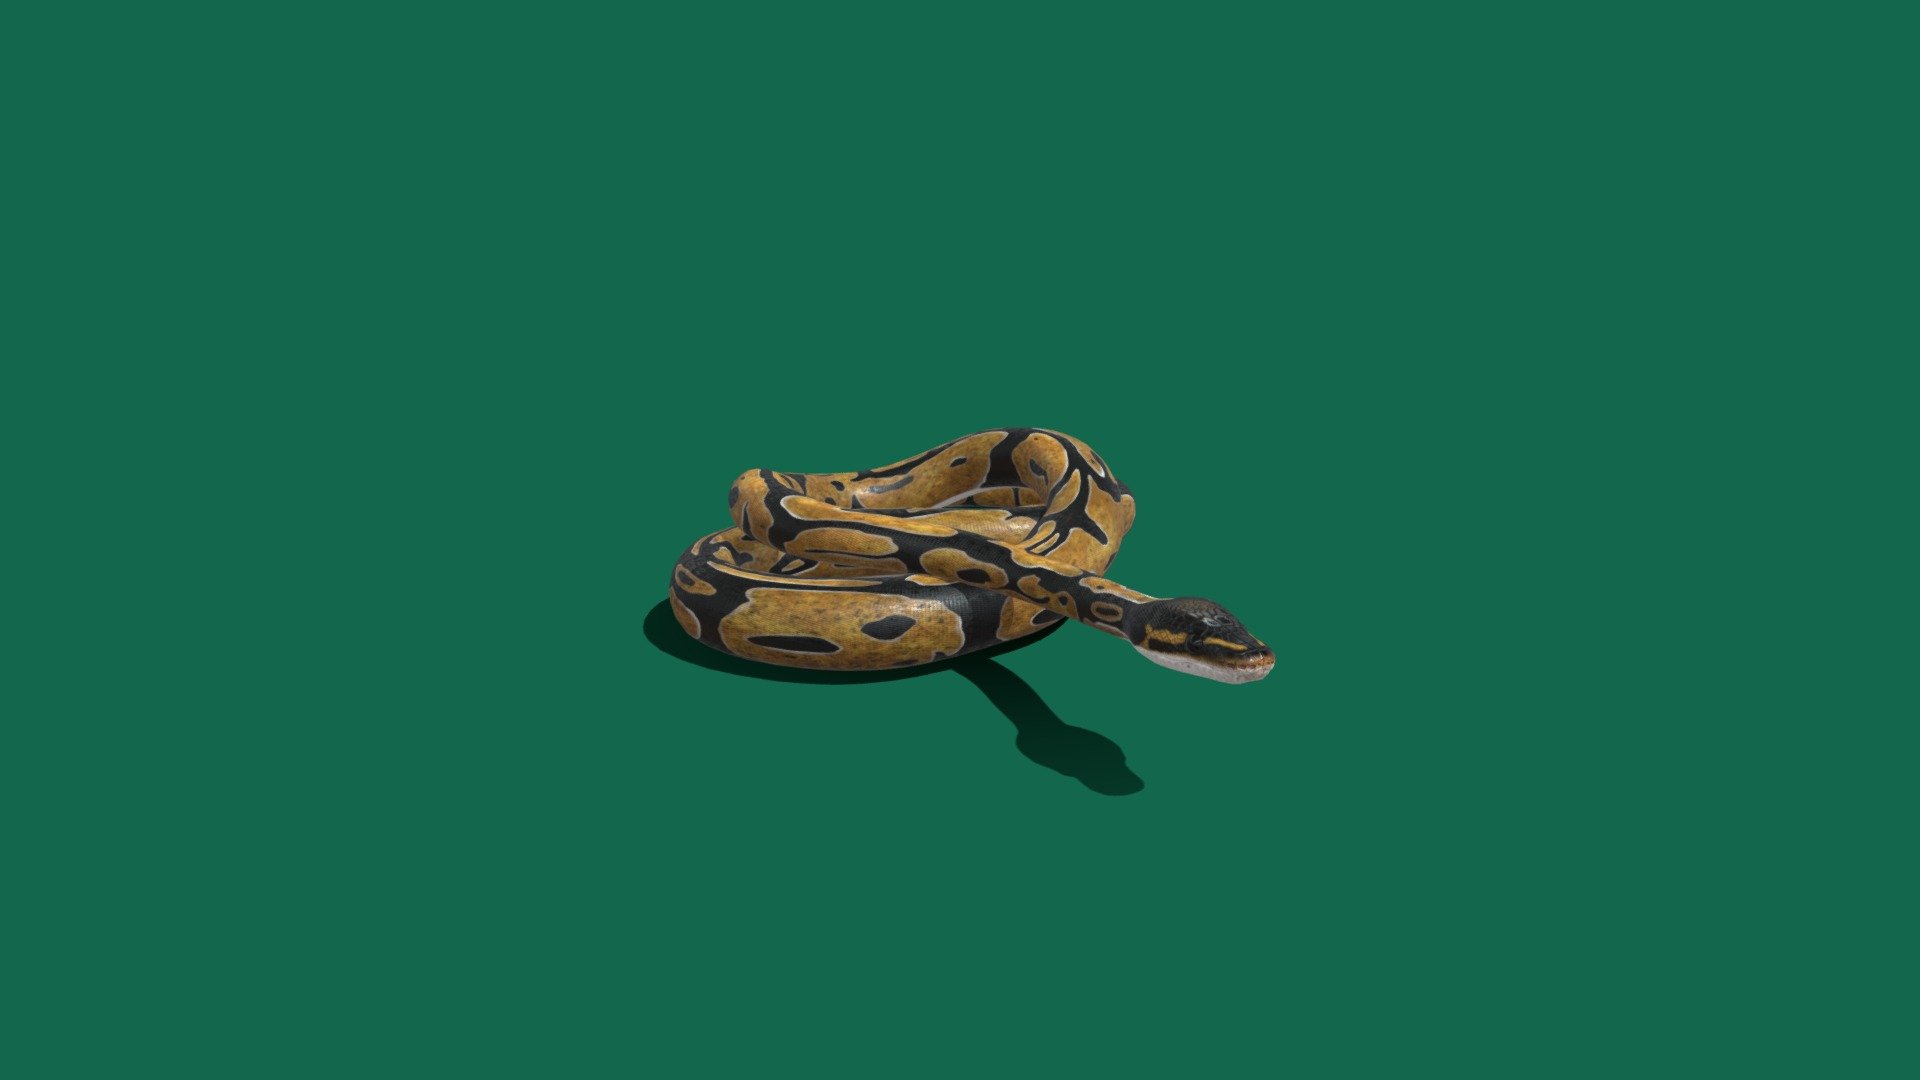 (Fixed)version -joints/errors animation plays and texture baked.
  The ball python, also called the royal python, is a python species native to West and Central Africa, where it lives in grasslands, shrublands and open forests. This nonvenomous constrictor is the smallest of the African pythons, growing to a maximum length of 182 cm. Wikipedia
Lifespan: 30 years (Male, In captivity)
Species: P. regius
Class: Reptilia
Family: Pythonidae
Genus: Python
Phylum: Chordata
Order: Squamata - Ball Python (Non-Commercial) (Fixed) - Download Free 3D model by Nyilonelycompany 3d model